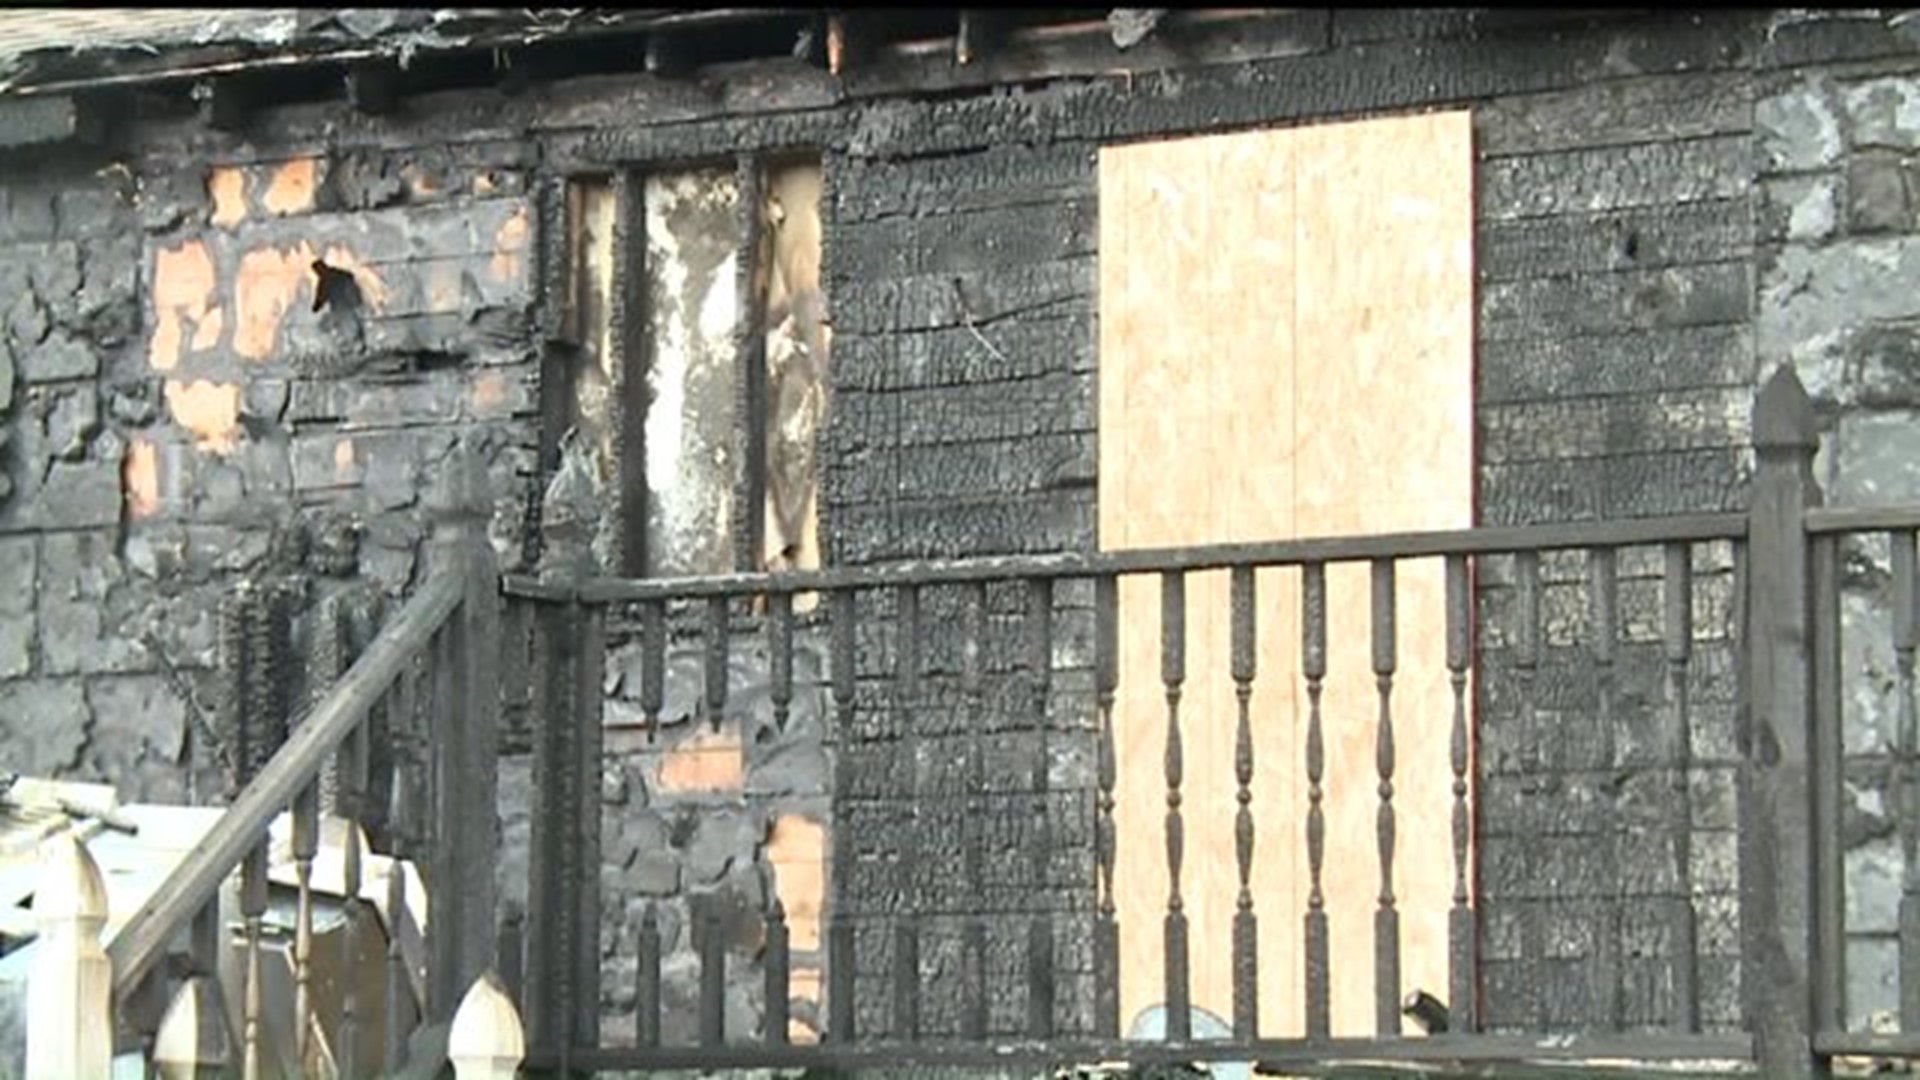 Deck fire destroys back of house in Colona